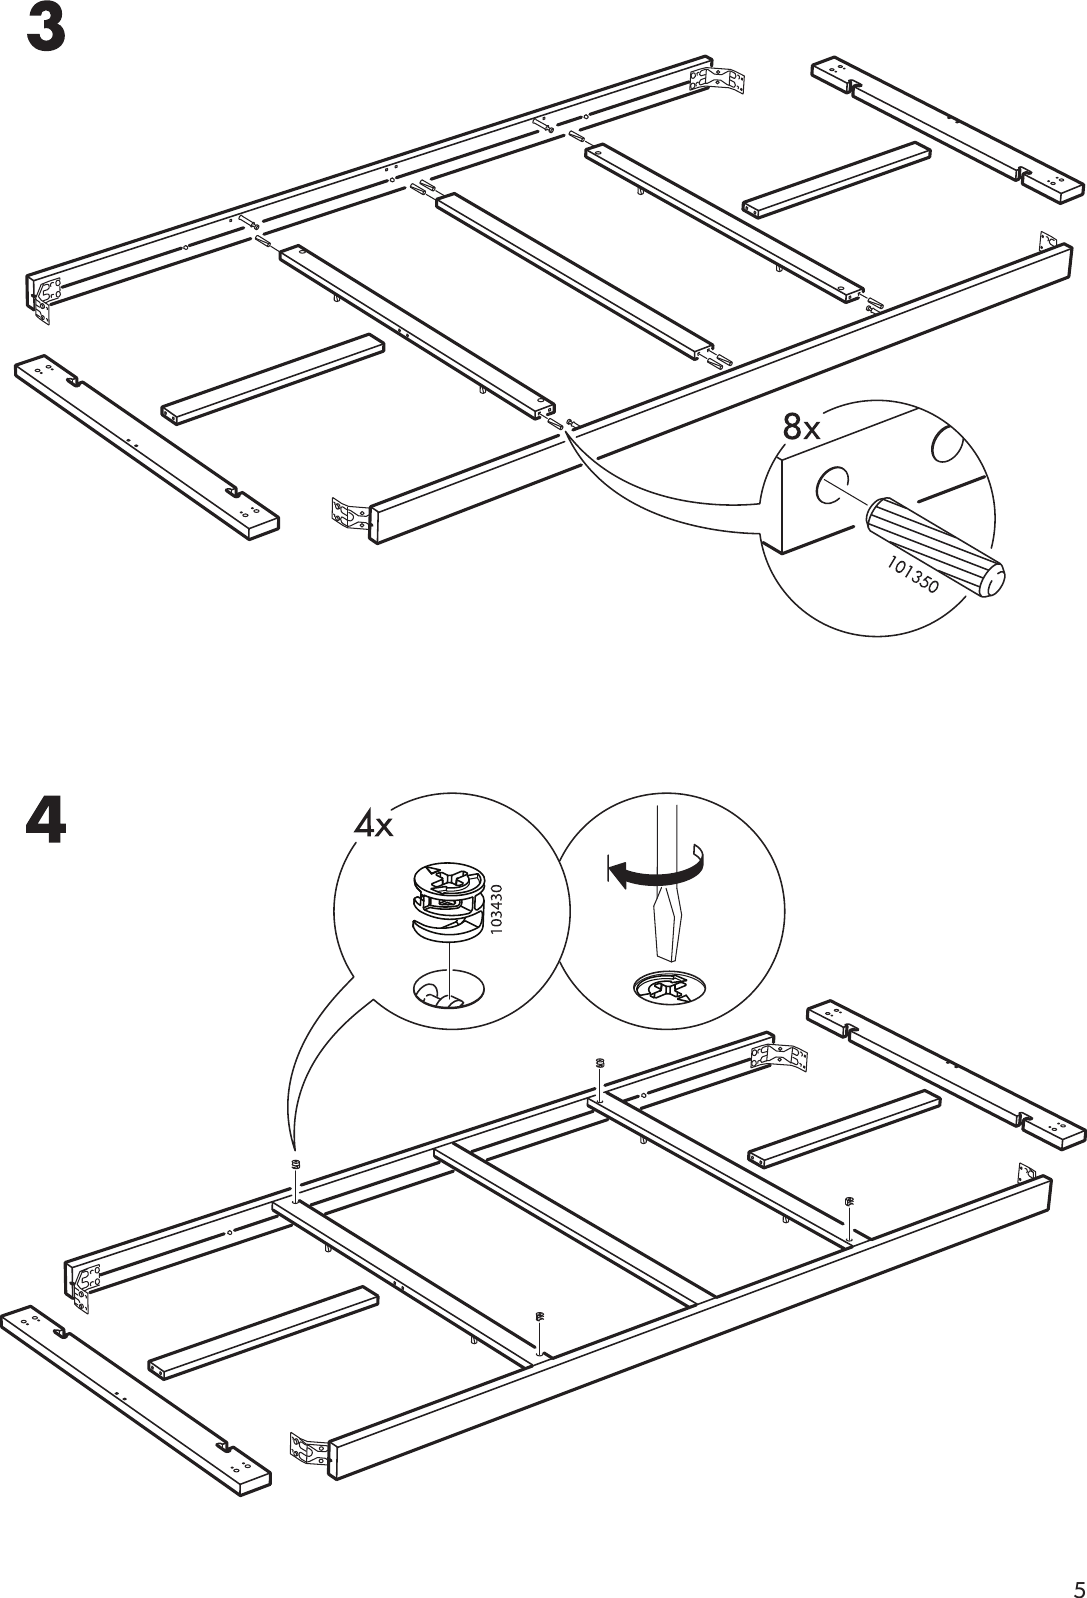 Page 5 of 12 - Ikea Ikea-Bjursta-Extendable-Dining-Table-94-114-133X43-Assembly-Instruction